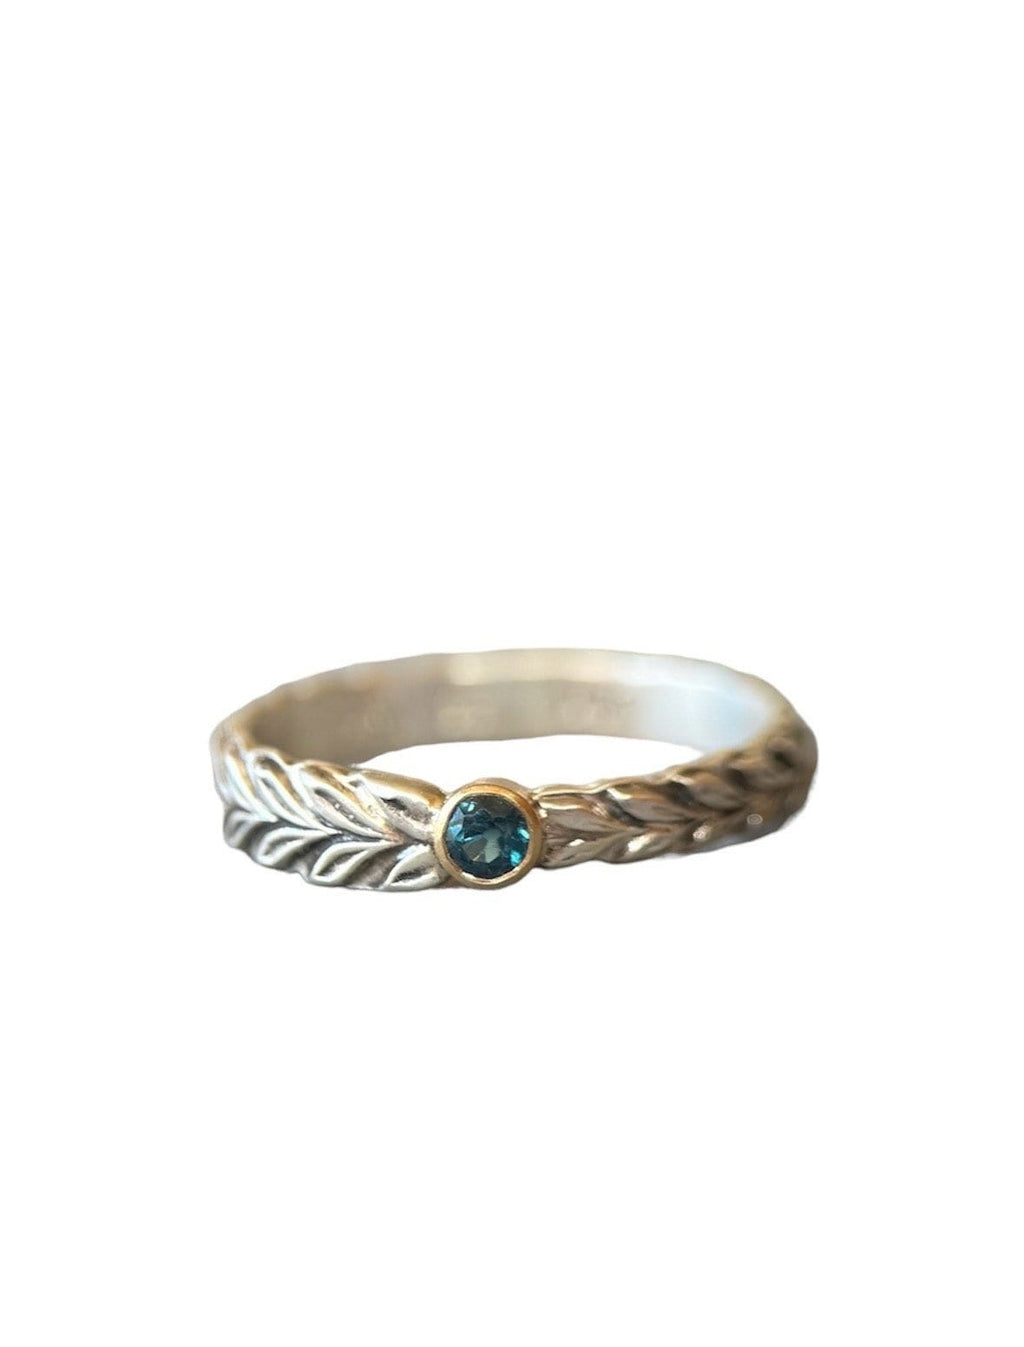 Blue Moissanite Ring with 14K gold setting, sterling silver